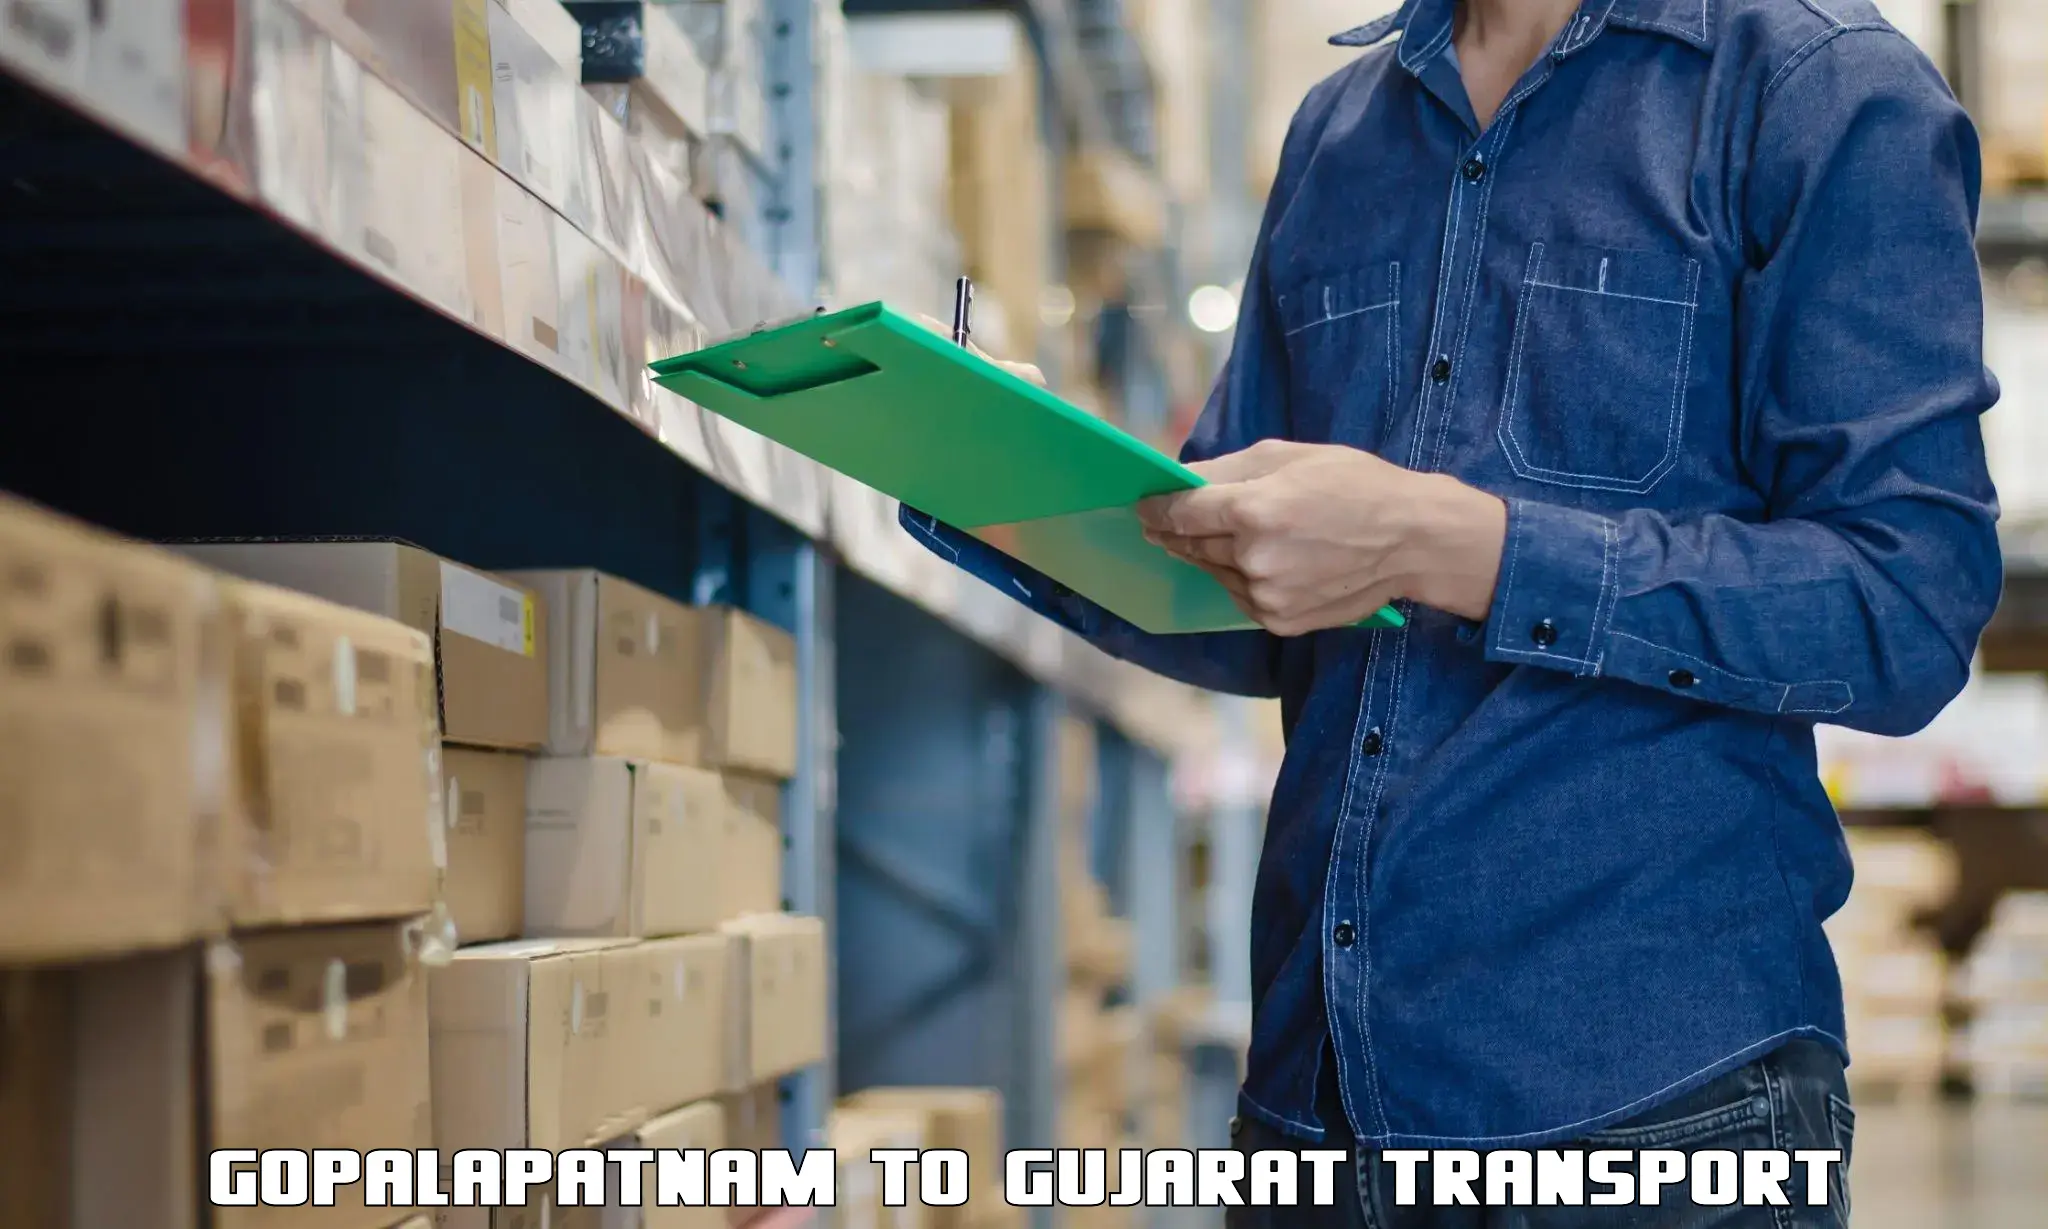 Container transport service Gopalapatnam to Anjar